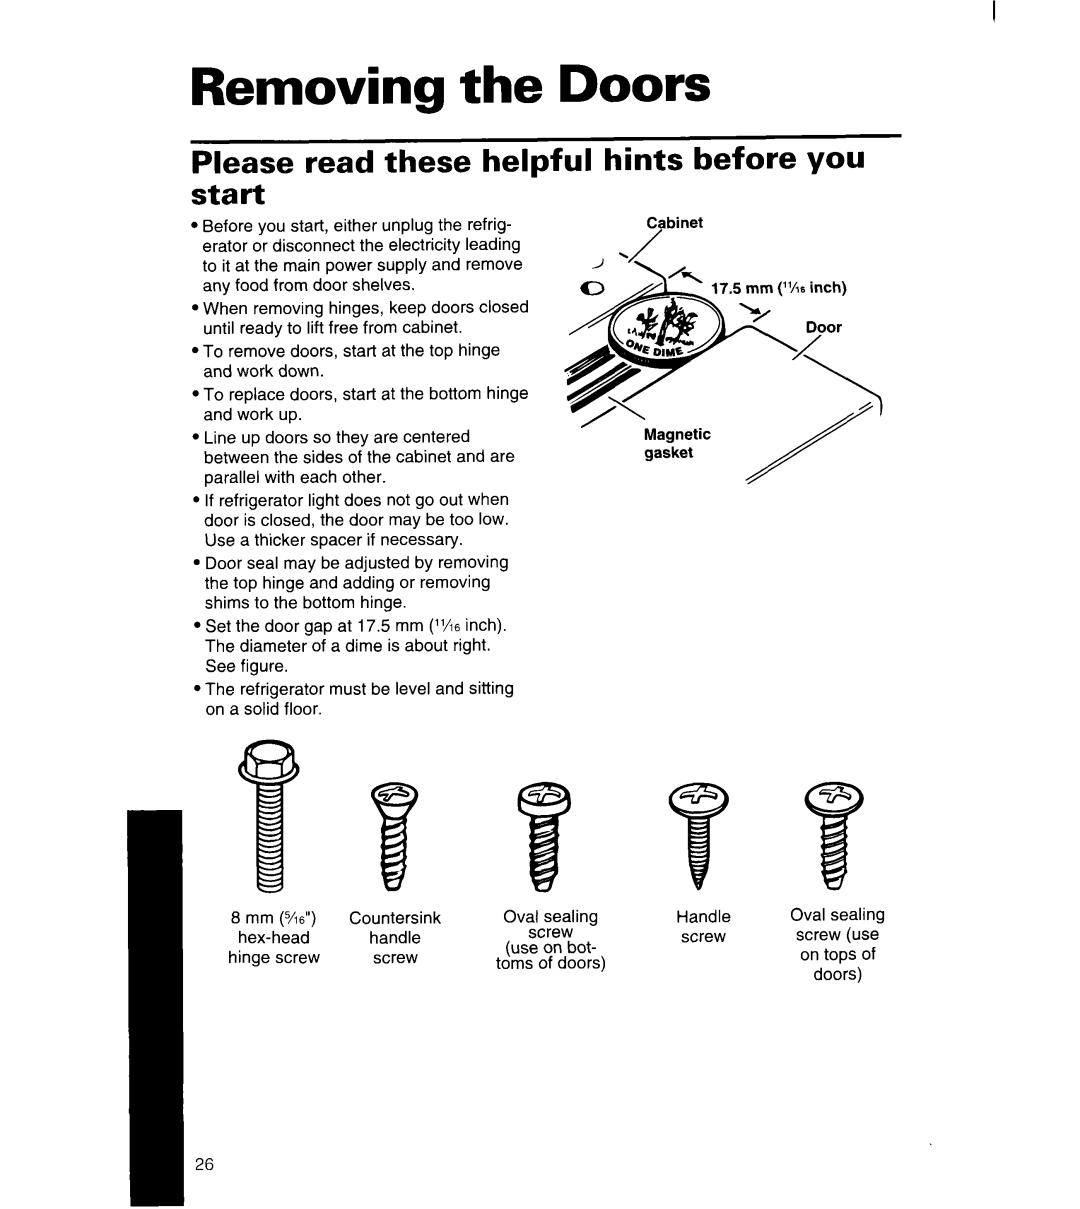 Whirlpool 4YED27DQDN00 manual Removing the Doors, Please read these helpful start, hints before you 